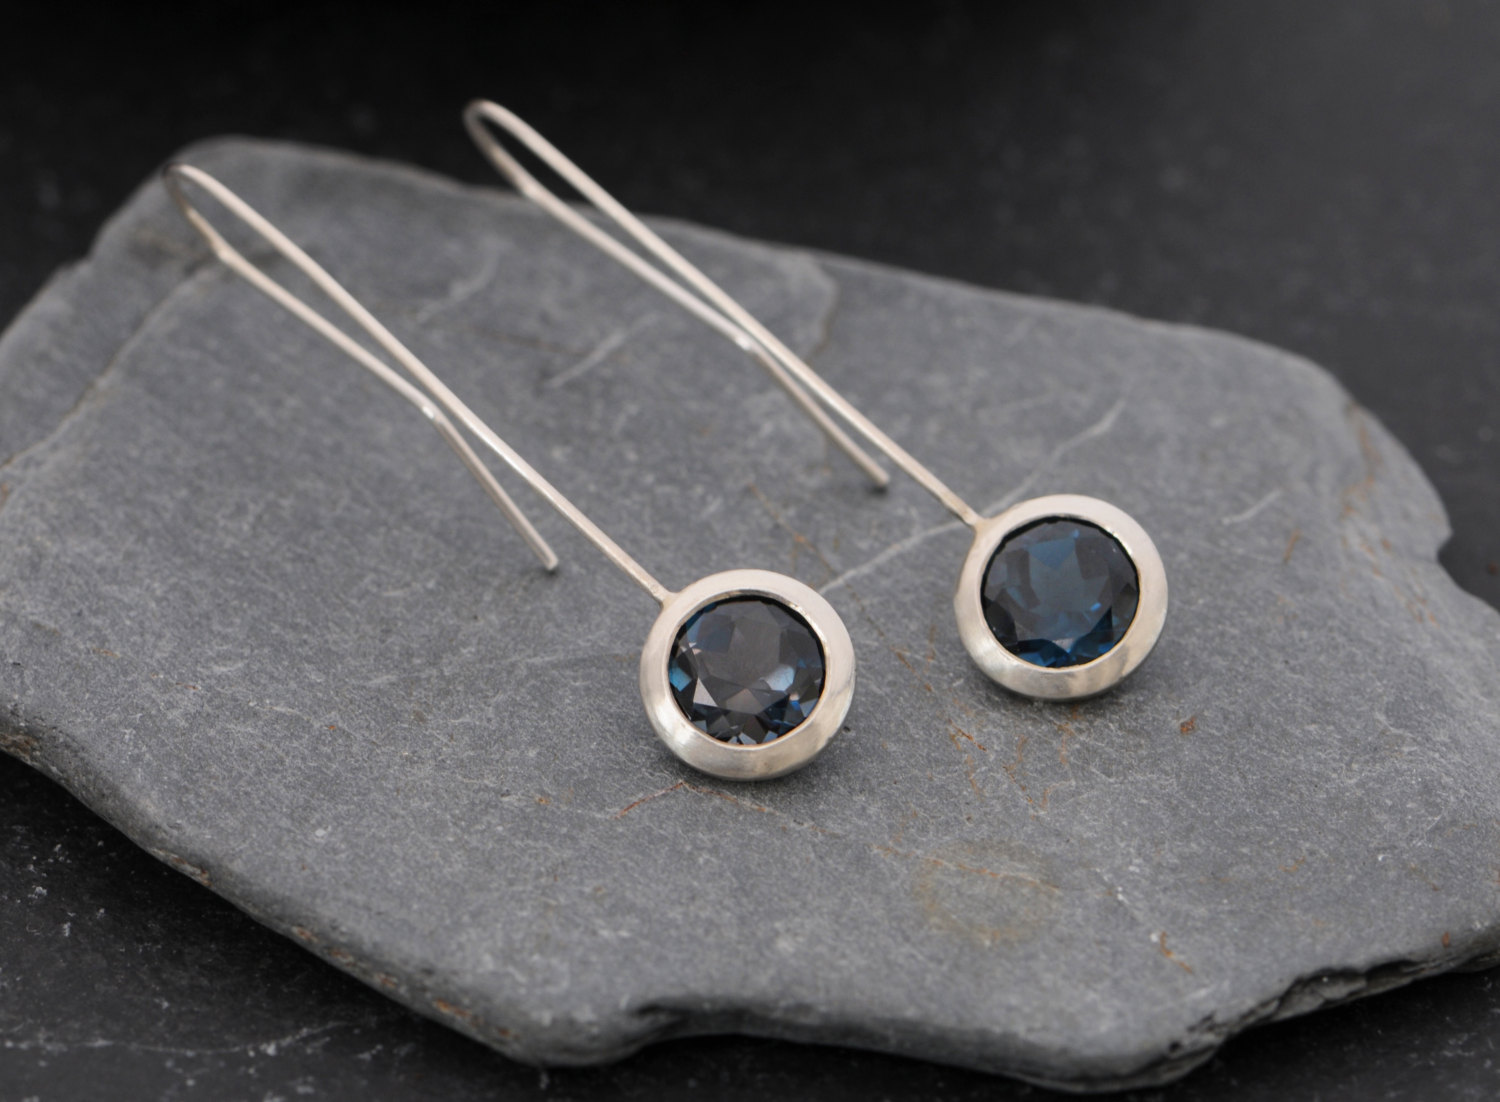 Deep blue, clean and simple London blue topaz 'lollipop' earrings, set in sterling silver. Adjustable length earrings designed and handmade by William White